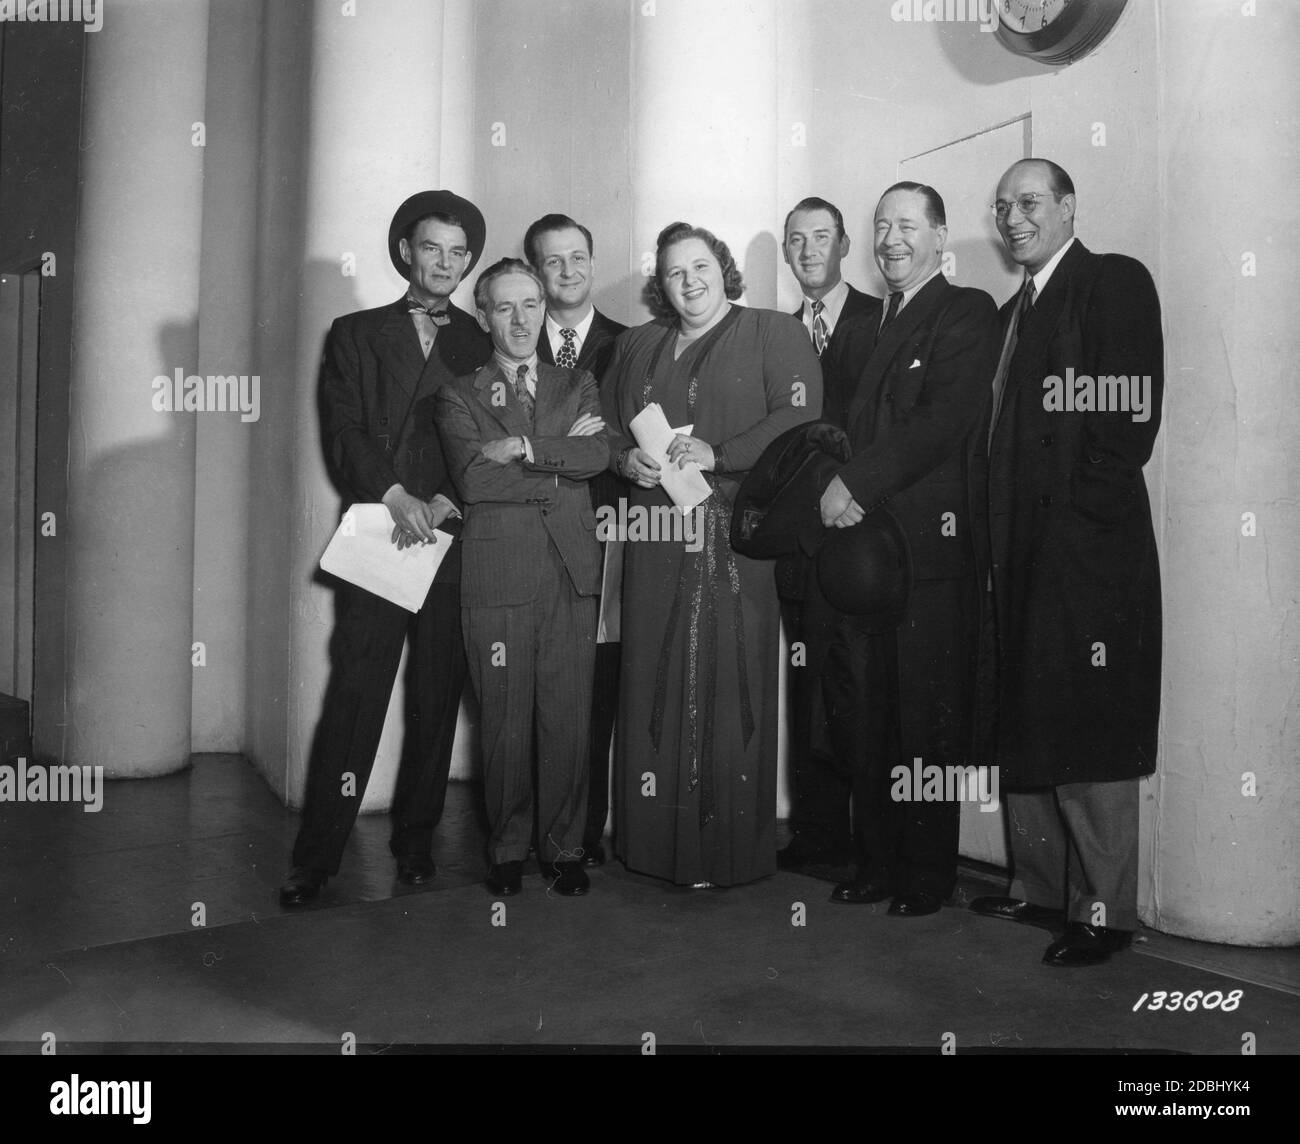 Il cast di "Command Performance USA", il programma radiofonico del War Department diretto da Kate Smith (1907-1986), mentre lasciano la CBS Playhouse n. 2. (L-r): Annunciatore ed Gerdner, Barry Wood, Miss Smith, Henry (Henny) Youngman, Robert Benchley e Ted Husing, New York, NY, 13/1942. (Foto di US Army Signal Corps/RBM Vintage Images) Foto Stock